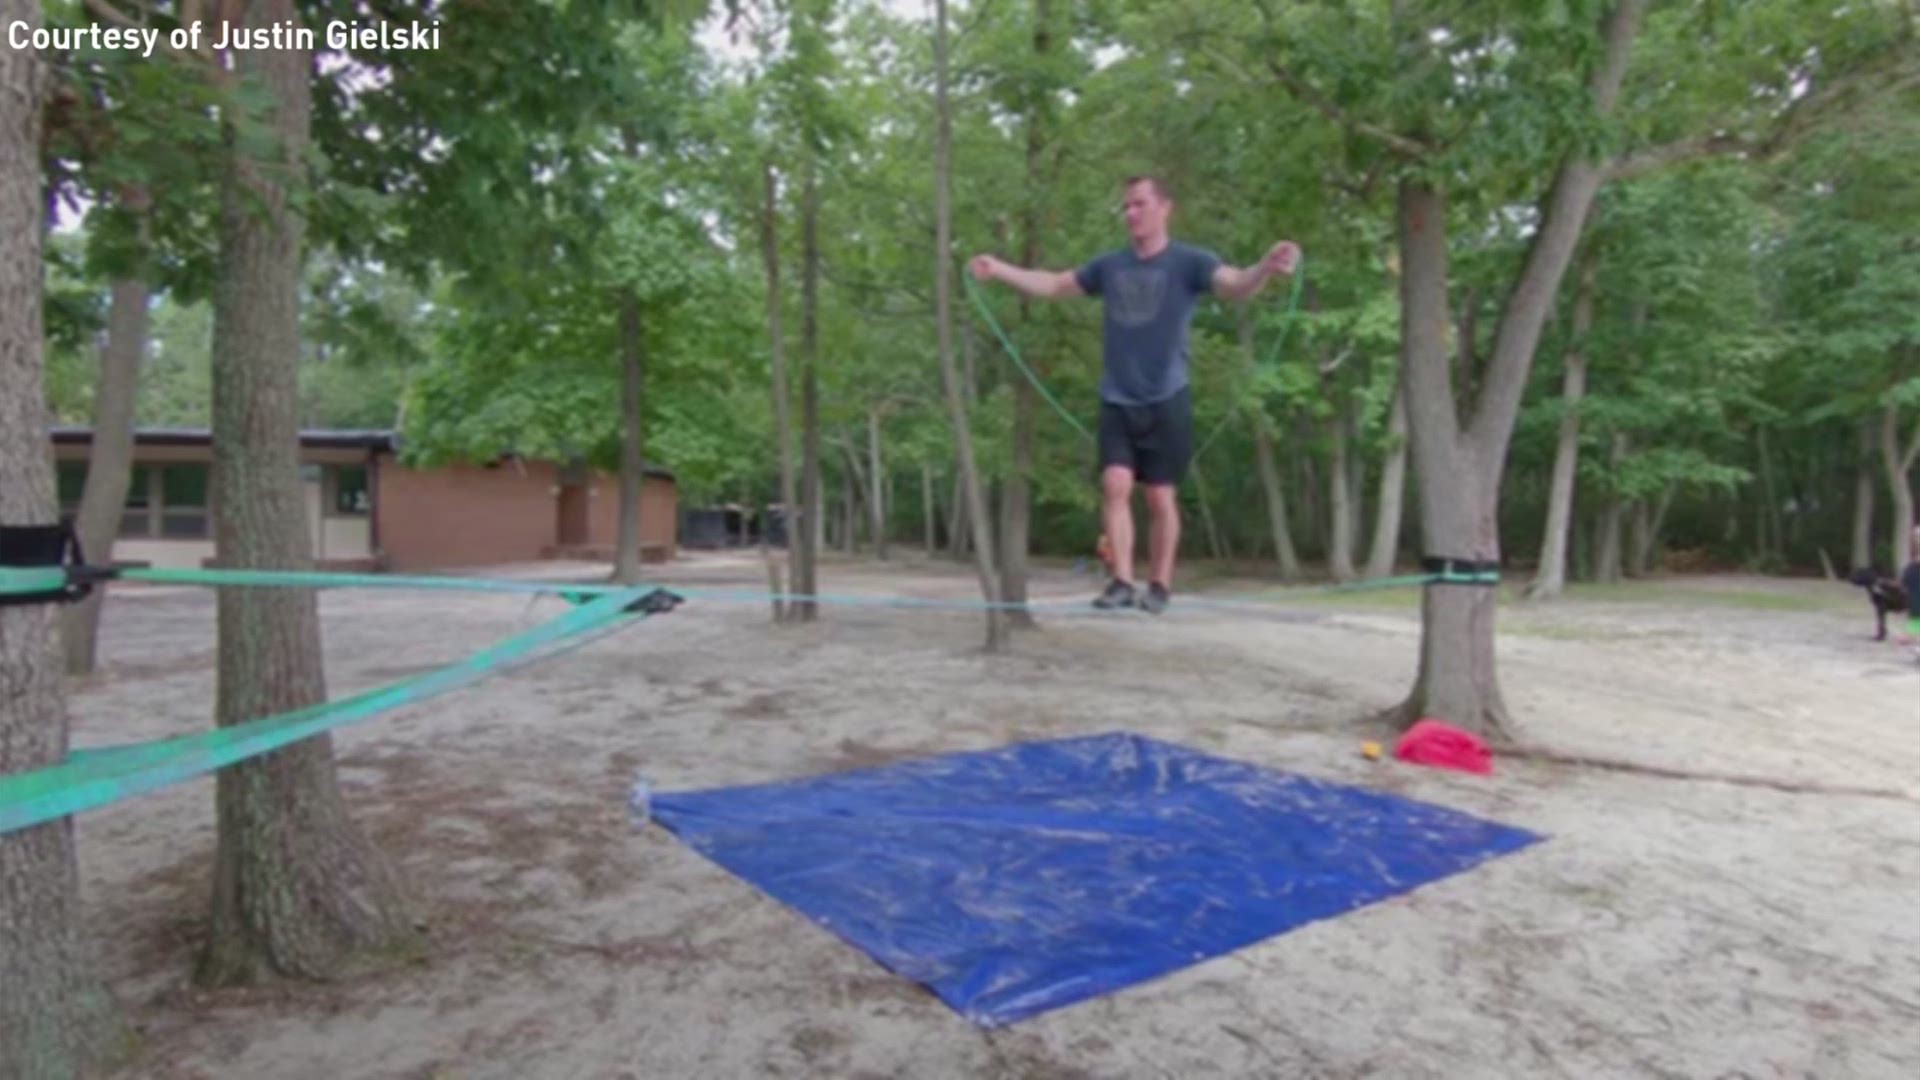 Justin Gielski sets a Guinness World Record of jumping rope on a slack line 27 consecutive times.